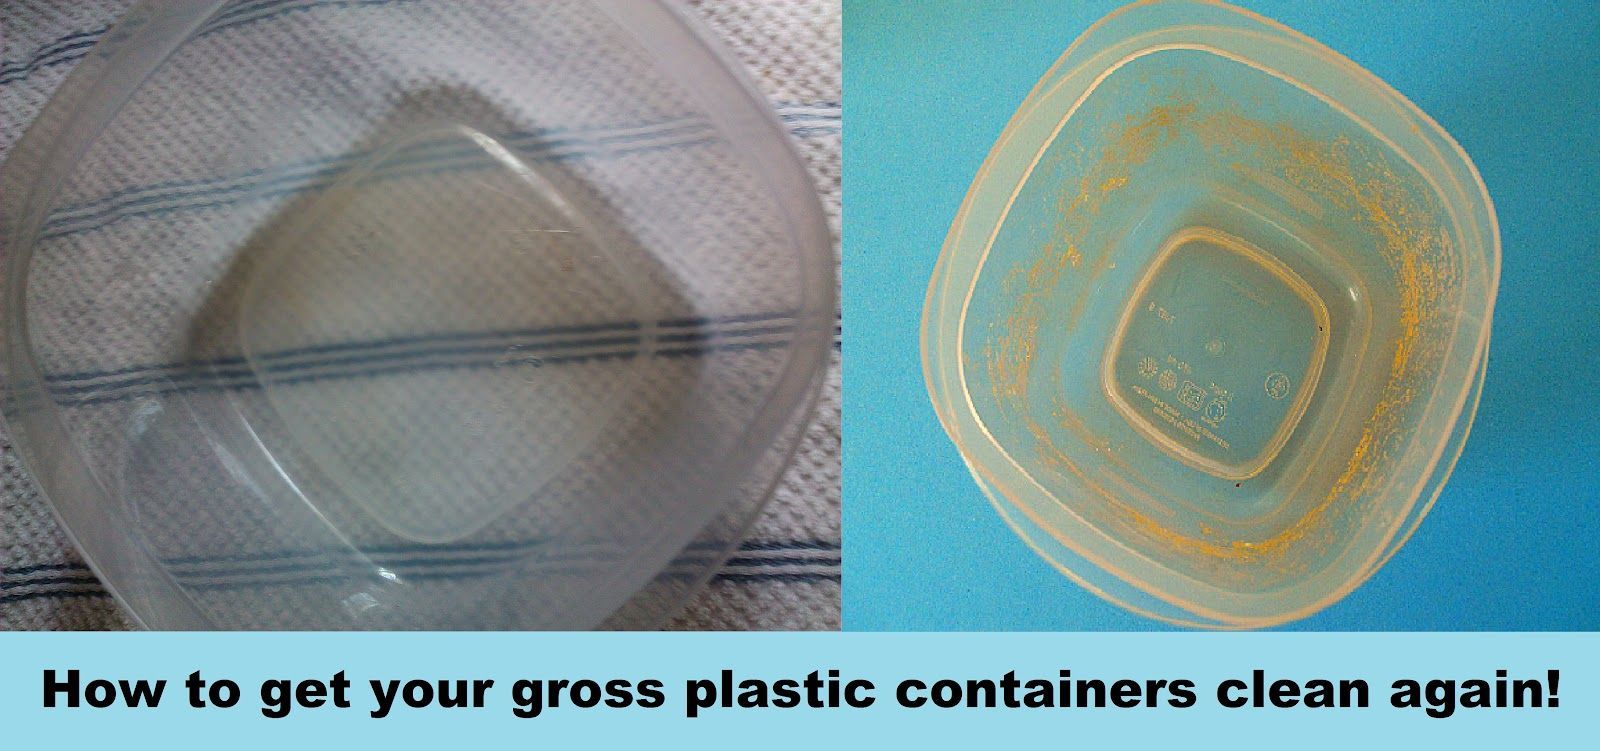 SO GOOD TO KNOW! How to Clean Your Gross Plastic Containers 1. Fill almost to th